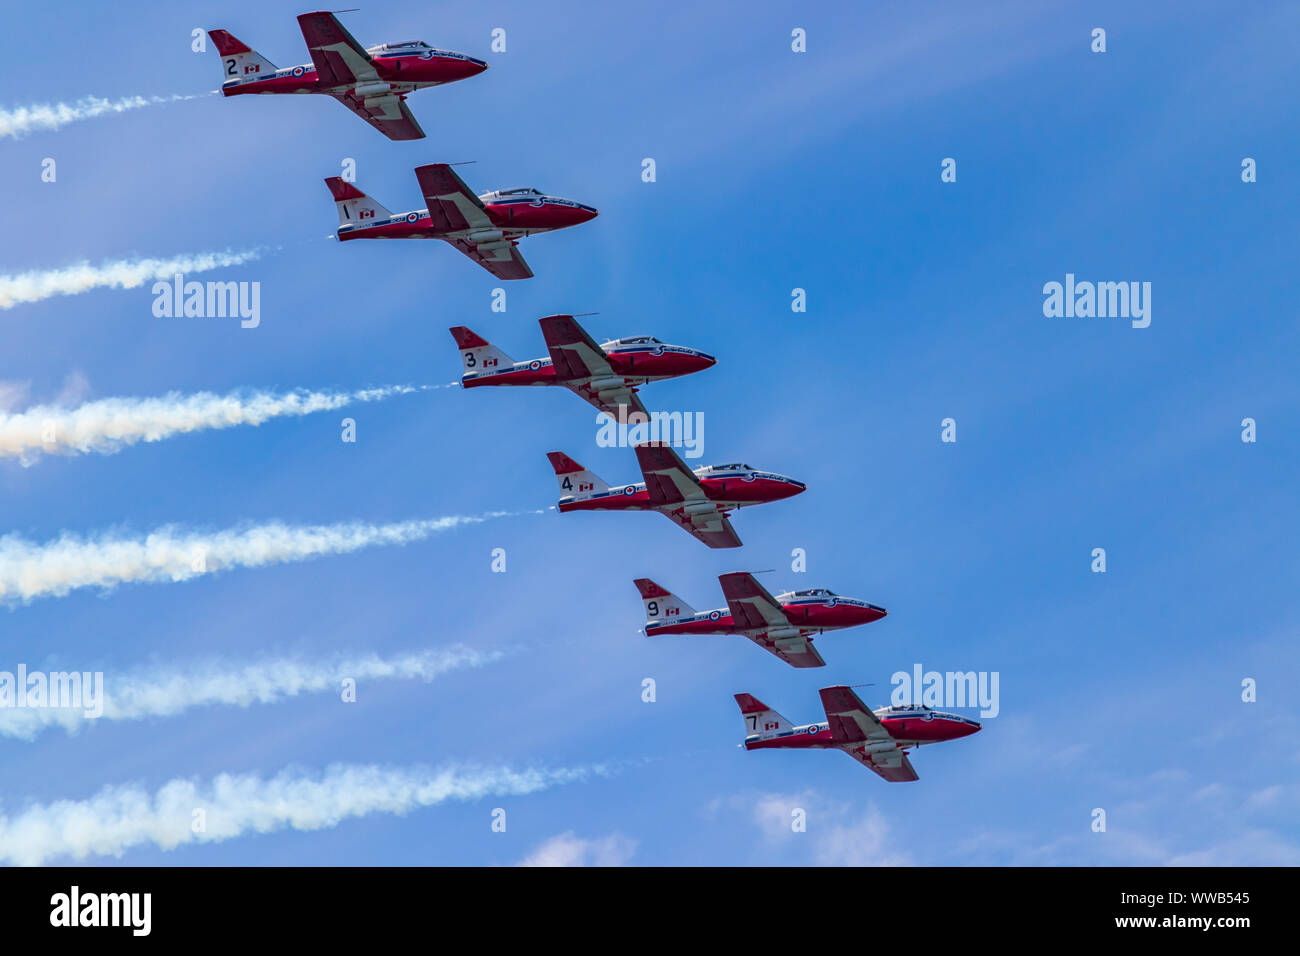 Royal Canadian Air Force's Snowbirds flying jet fighter planes in the 70th Anniversary Canadian International Air Show. Stock Photo